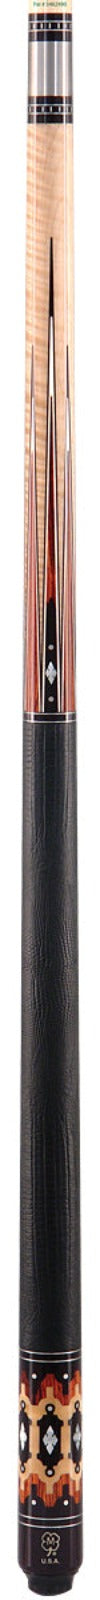 McDermott G1501 - Comes with i-2 Shaft Pool Cue